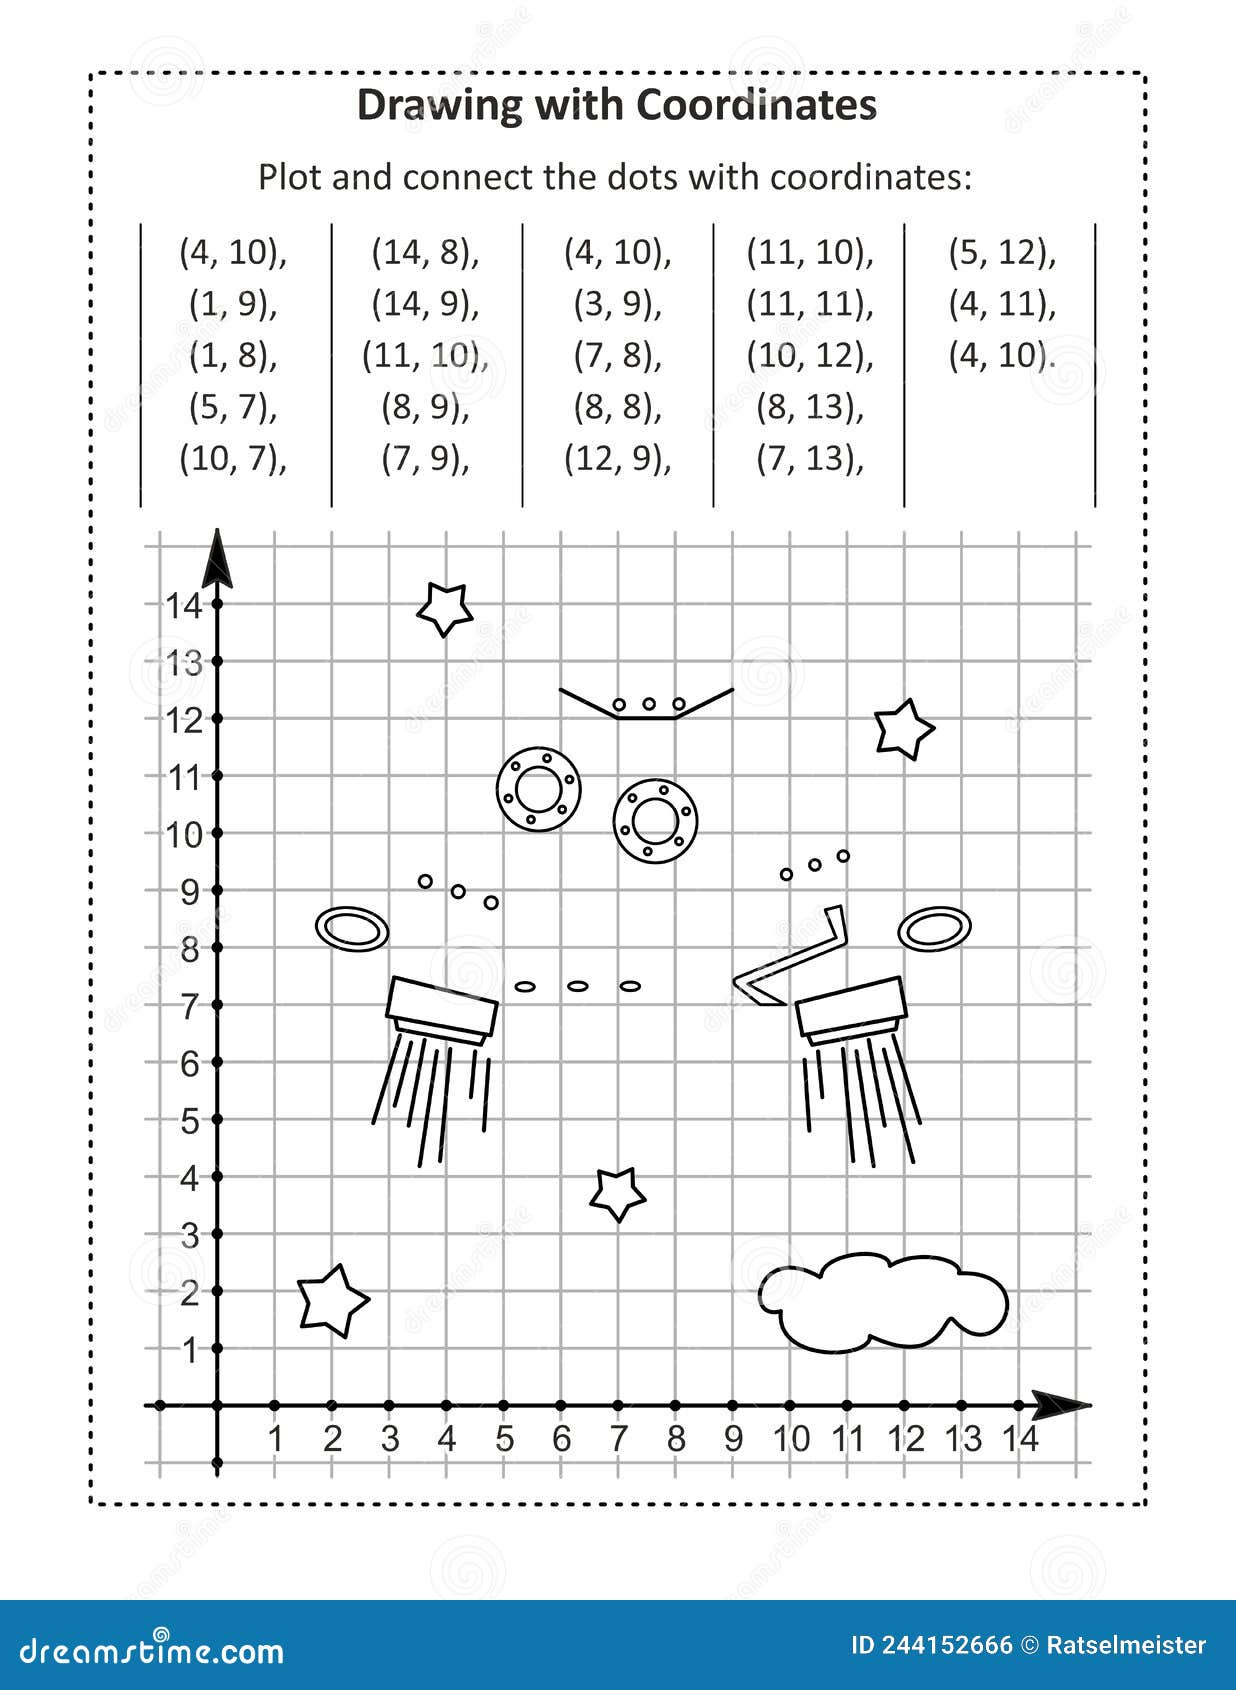 coordinate graphing, or drawing by coordinates, math worksheet with ufo: reveal the mystery picture by plotting and connecting the